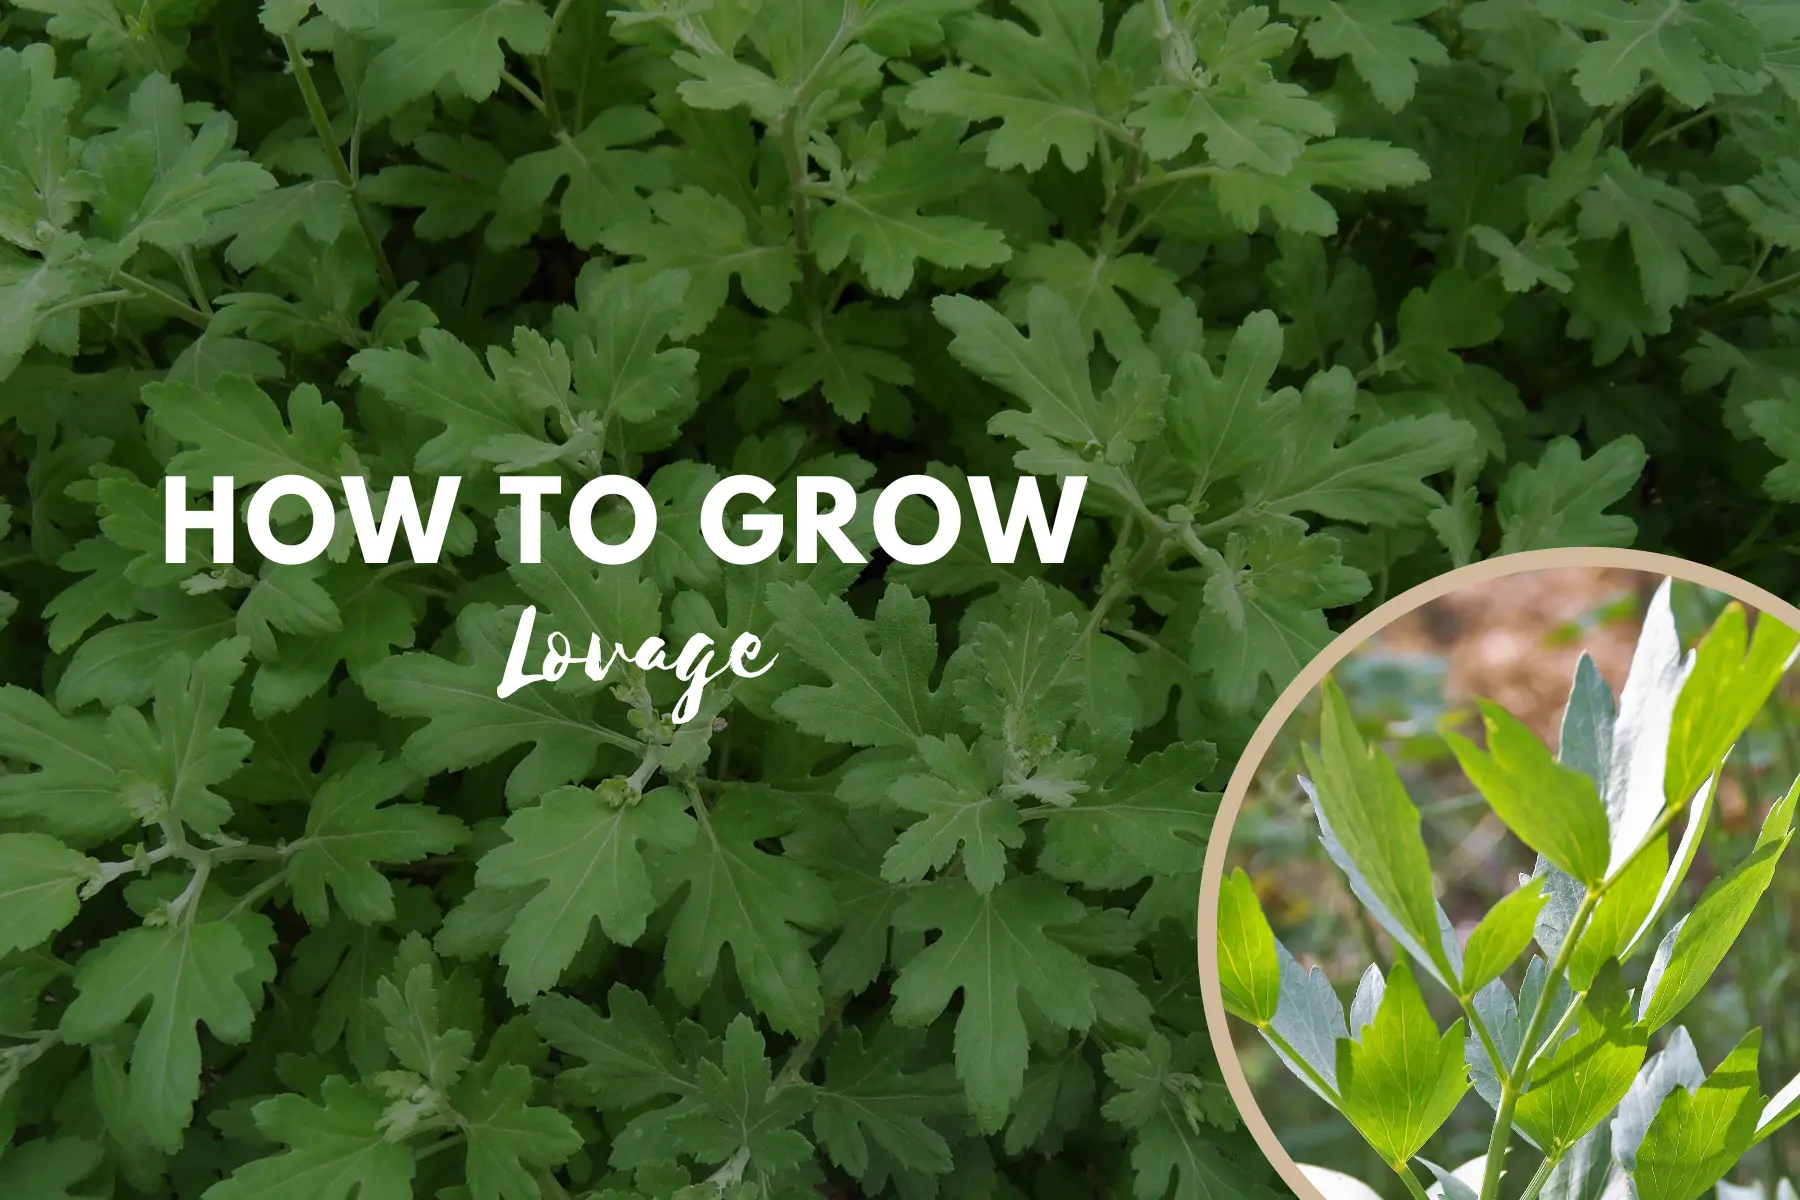 How To Grow Lovage